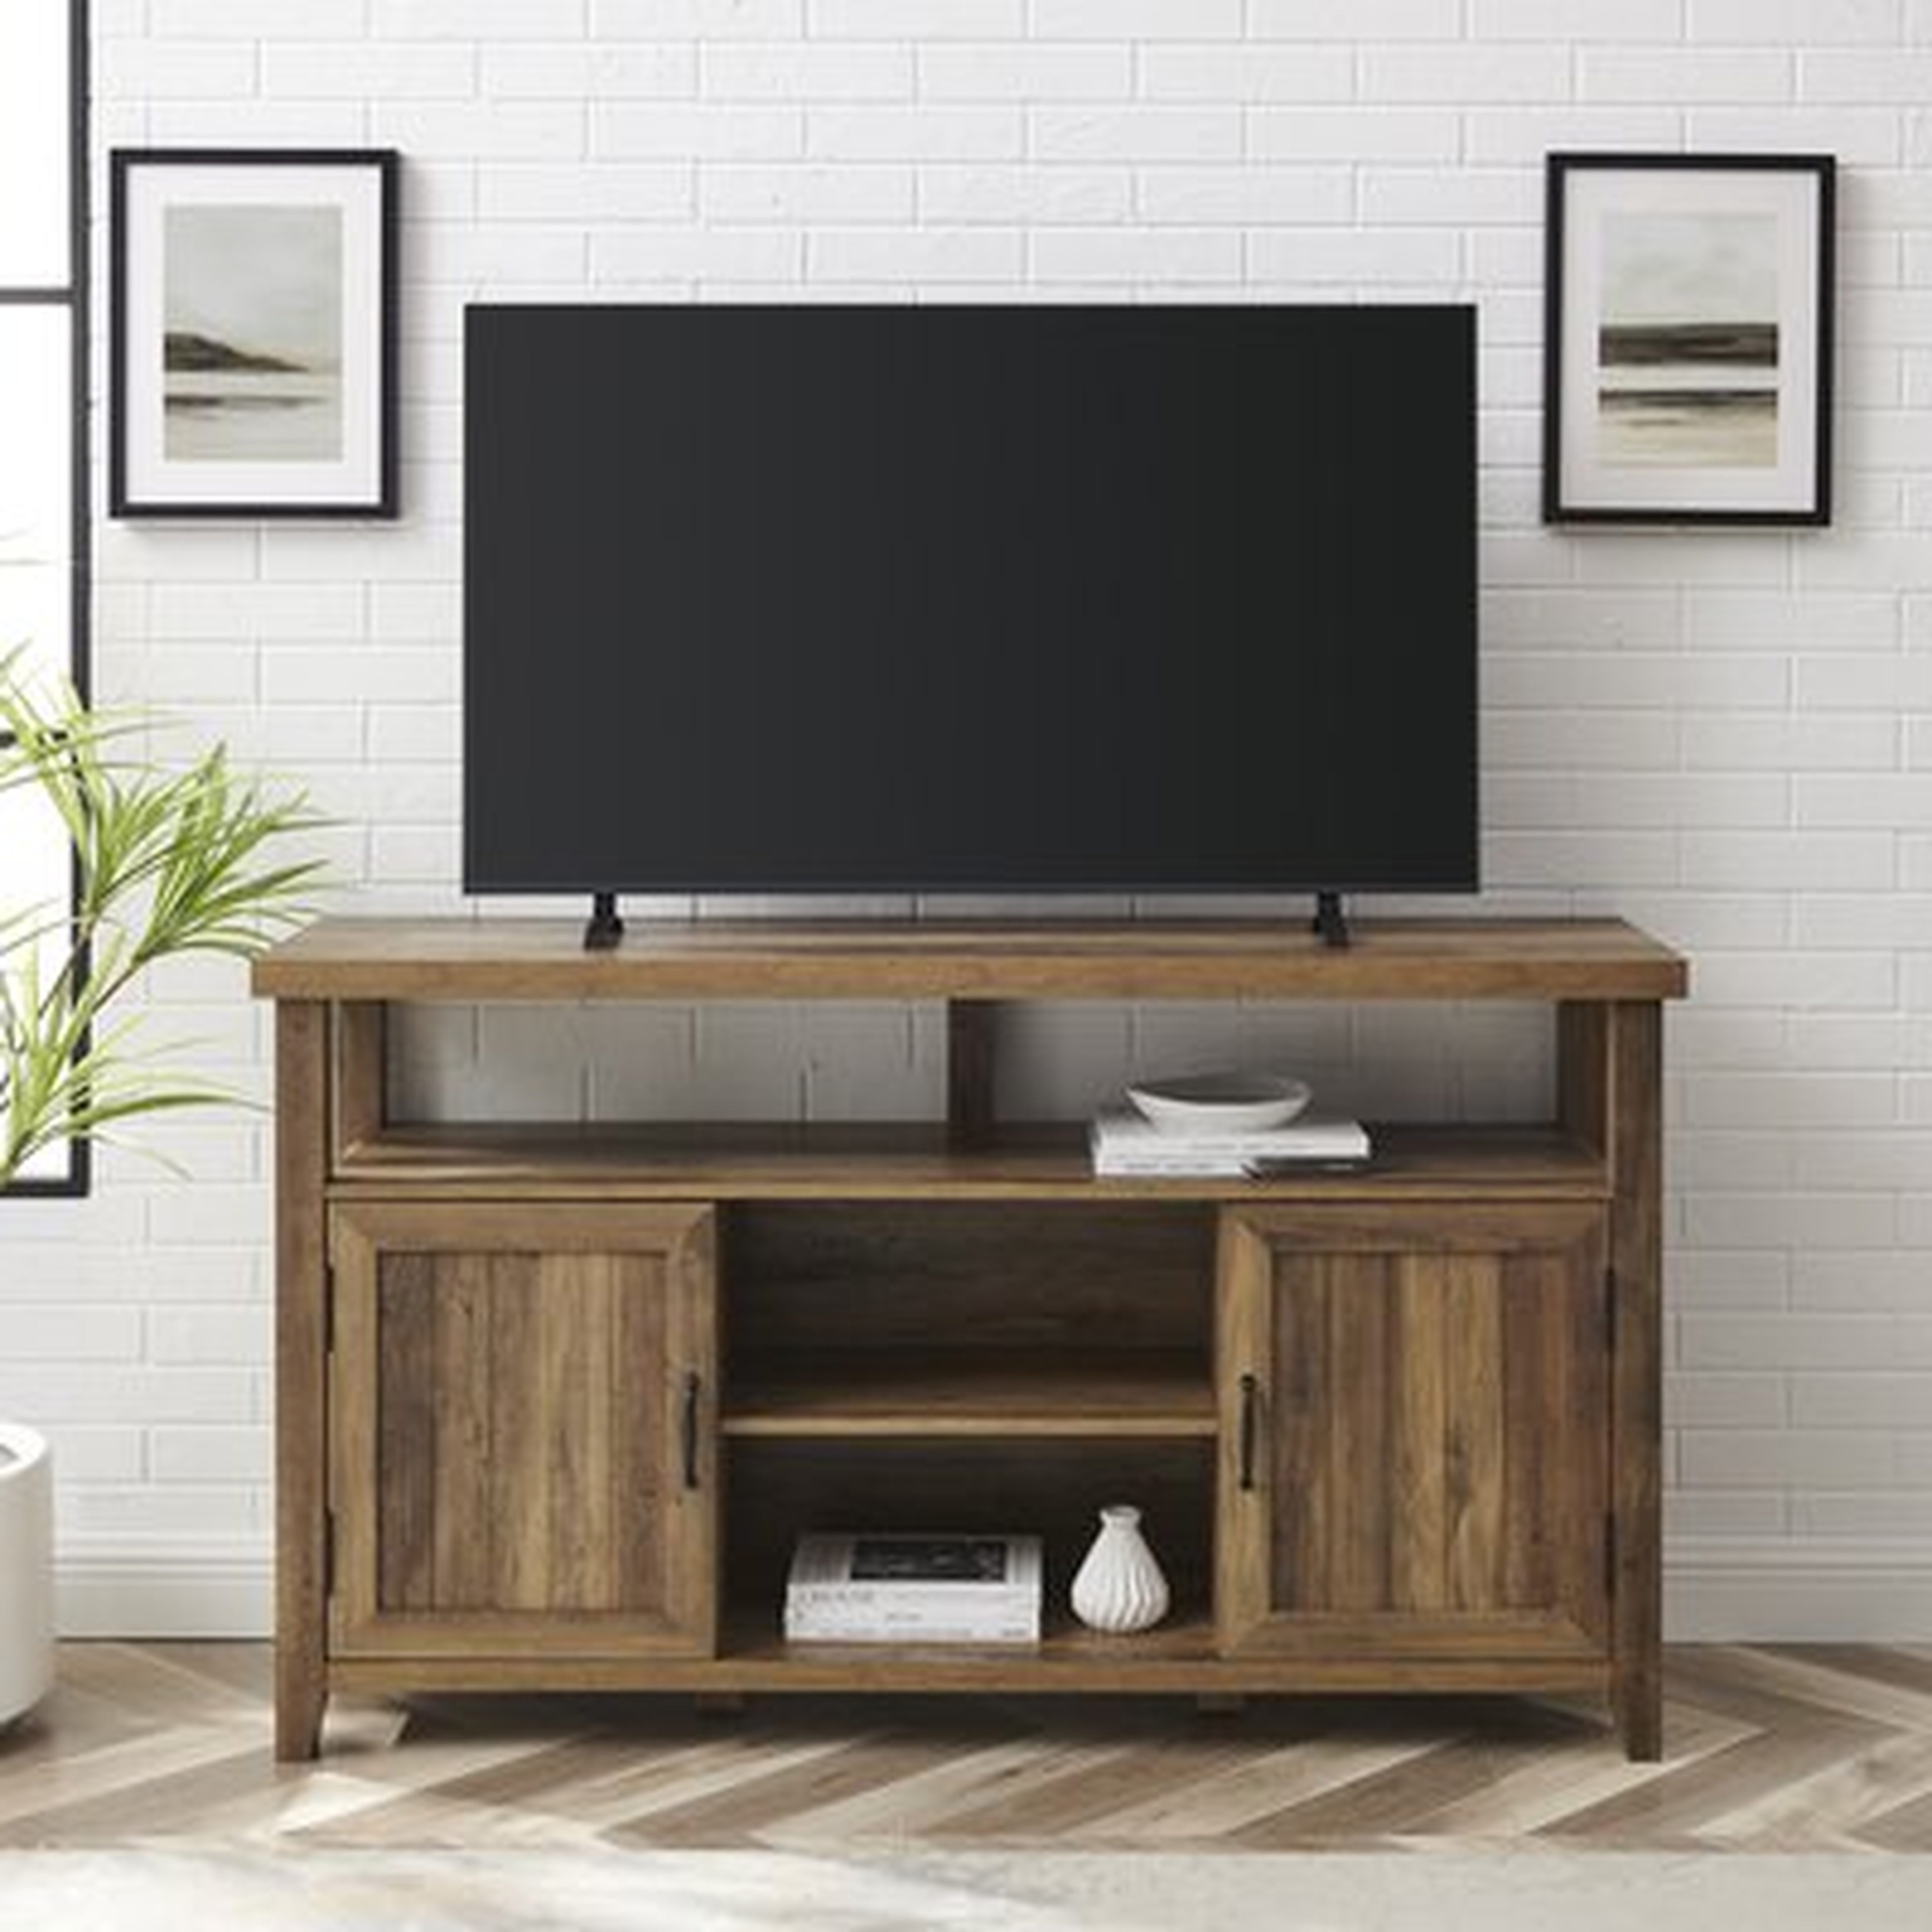 Chatham Square TV Stand for TVs up to 65" - Wayfair